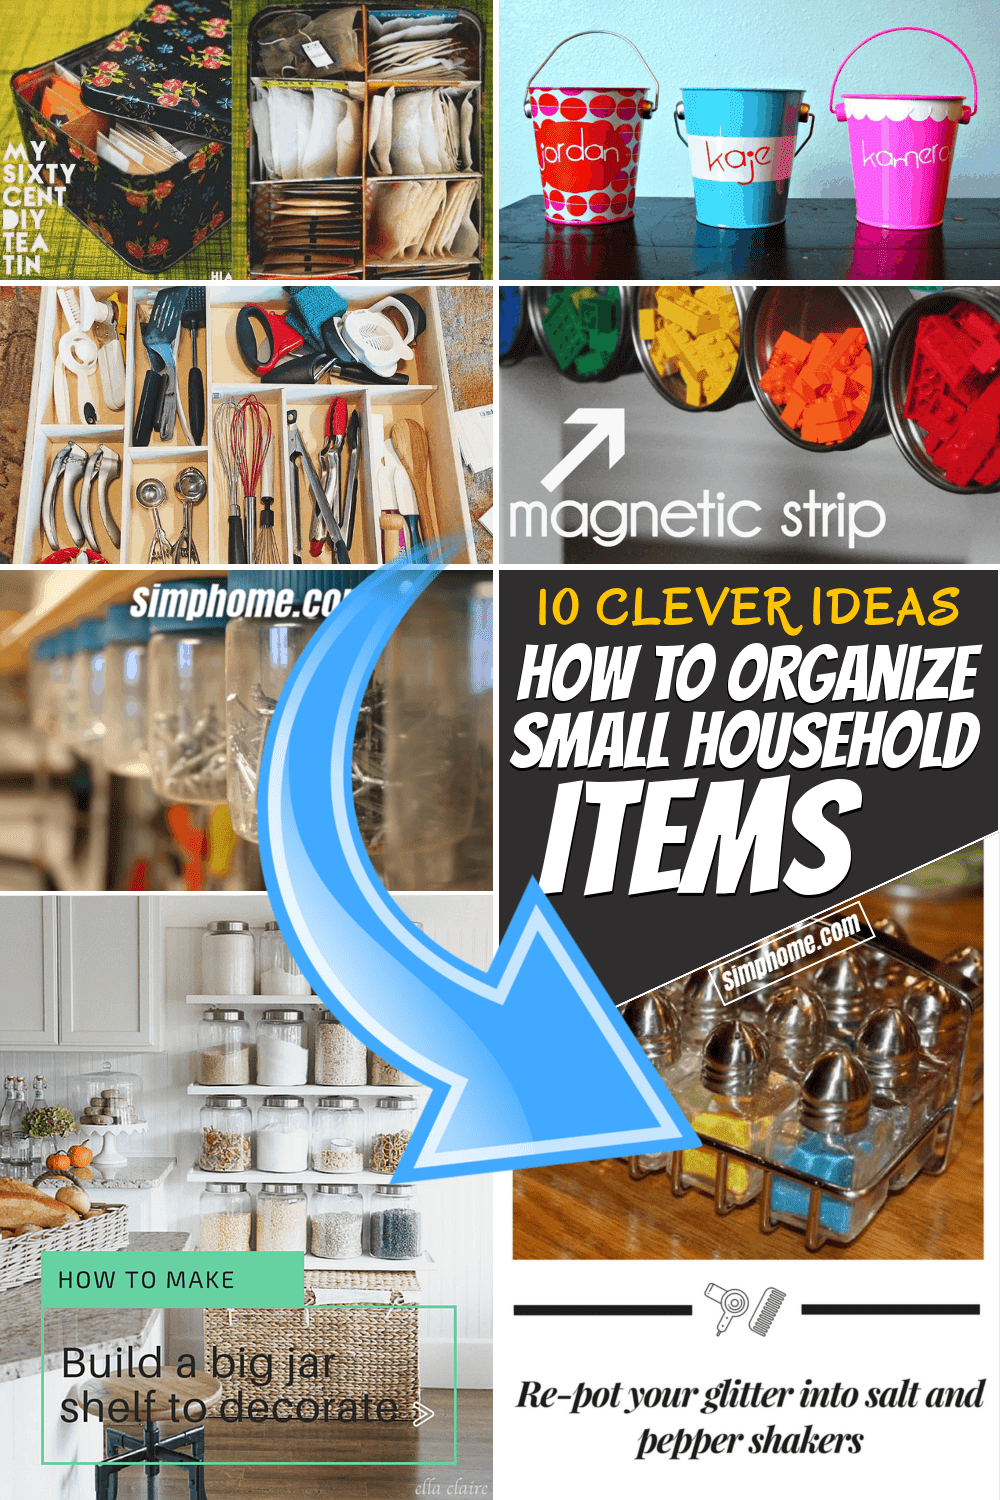 33 Clever Ideas How to Organize Small Household Items